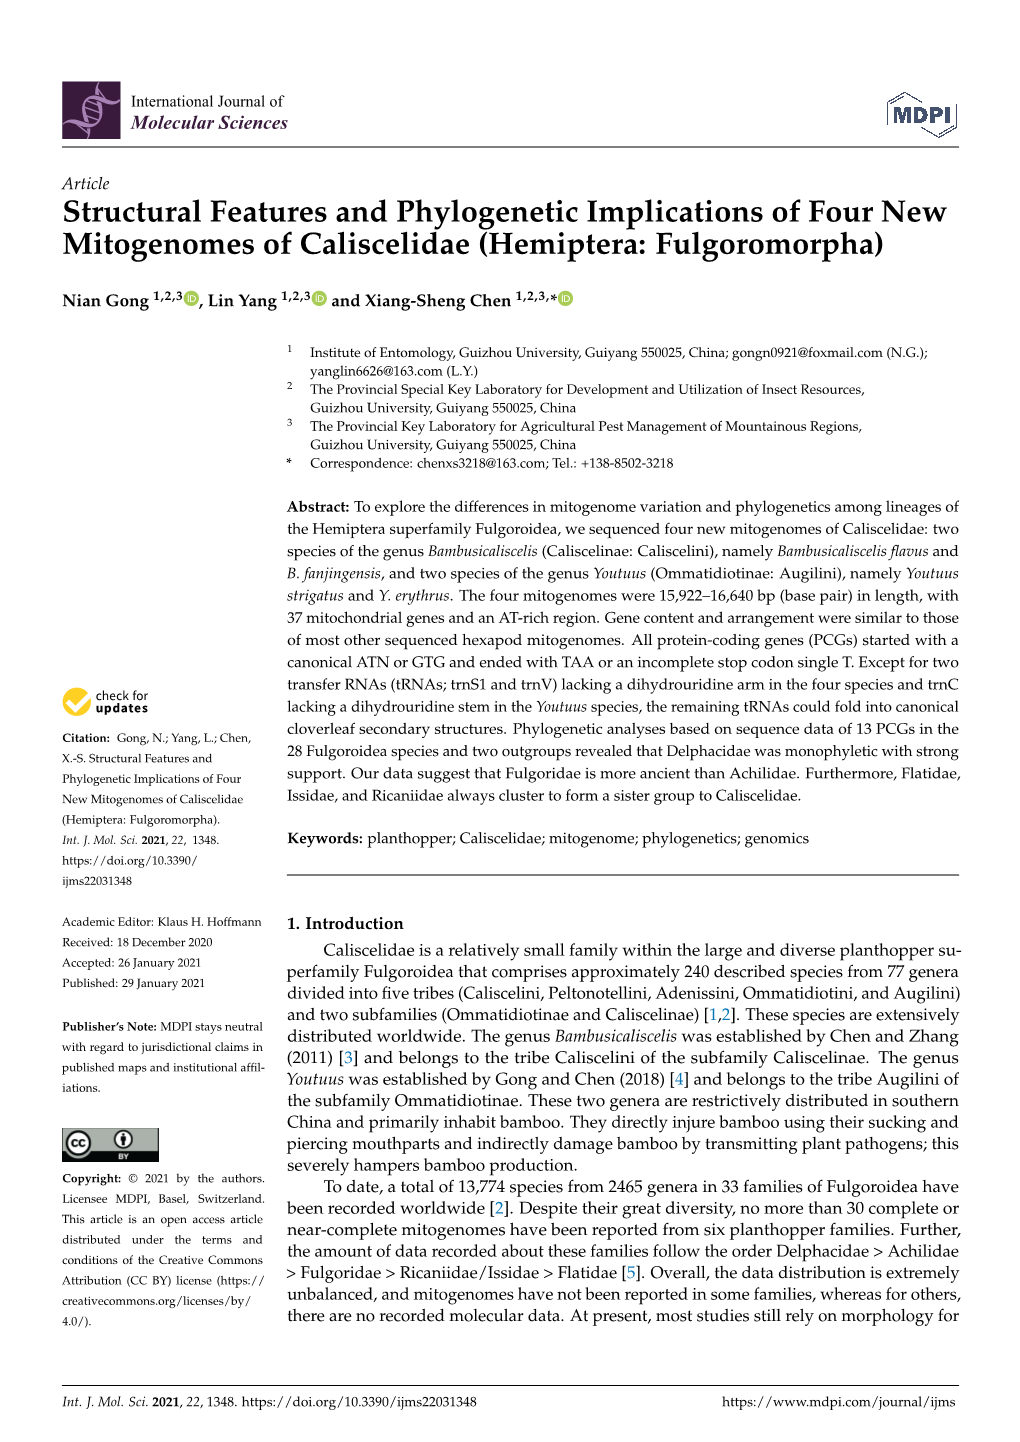 Structural Features and Phylogenetic Implications of Four New Mitogenomes of Caliscelidae (Hemiptera: Fulgoromorpha)